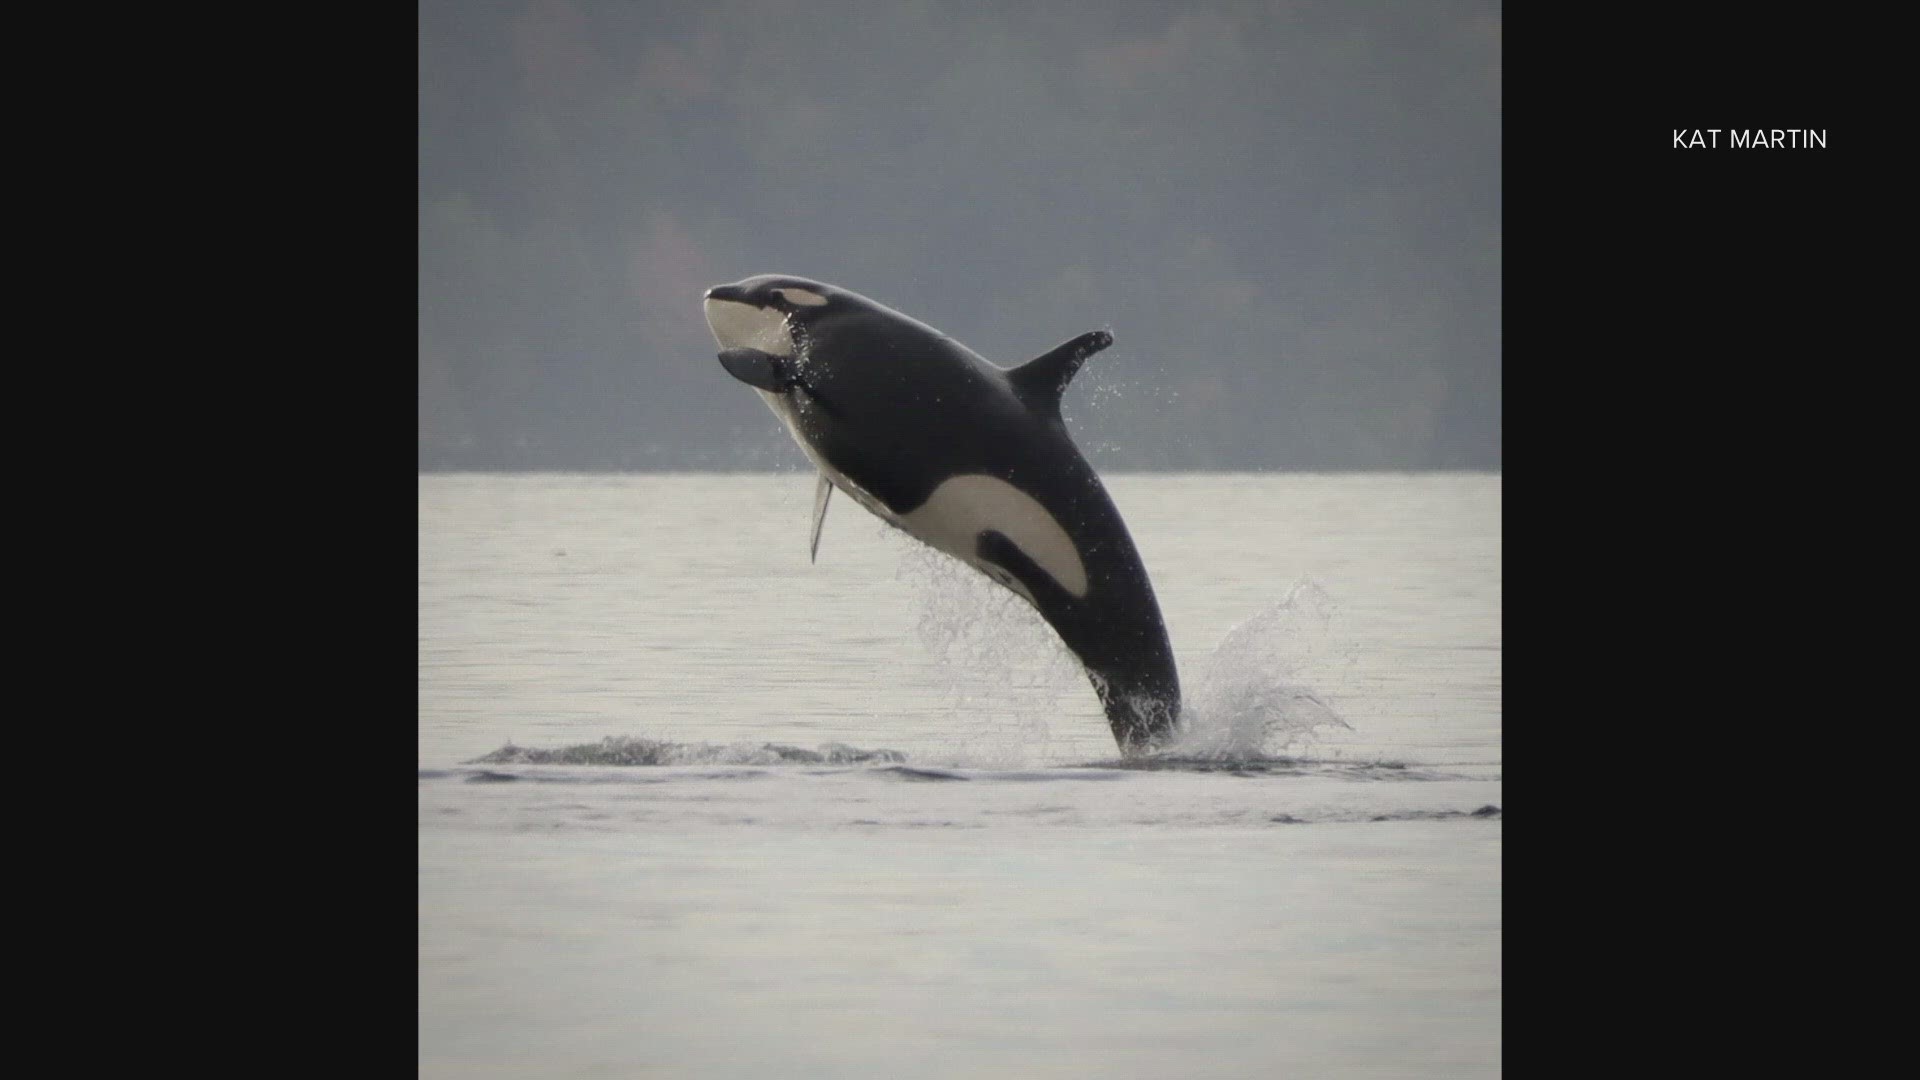 Orca sightings around Puget Sound have been on the rise the last couple months, according to a whale expert.